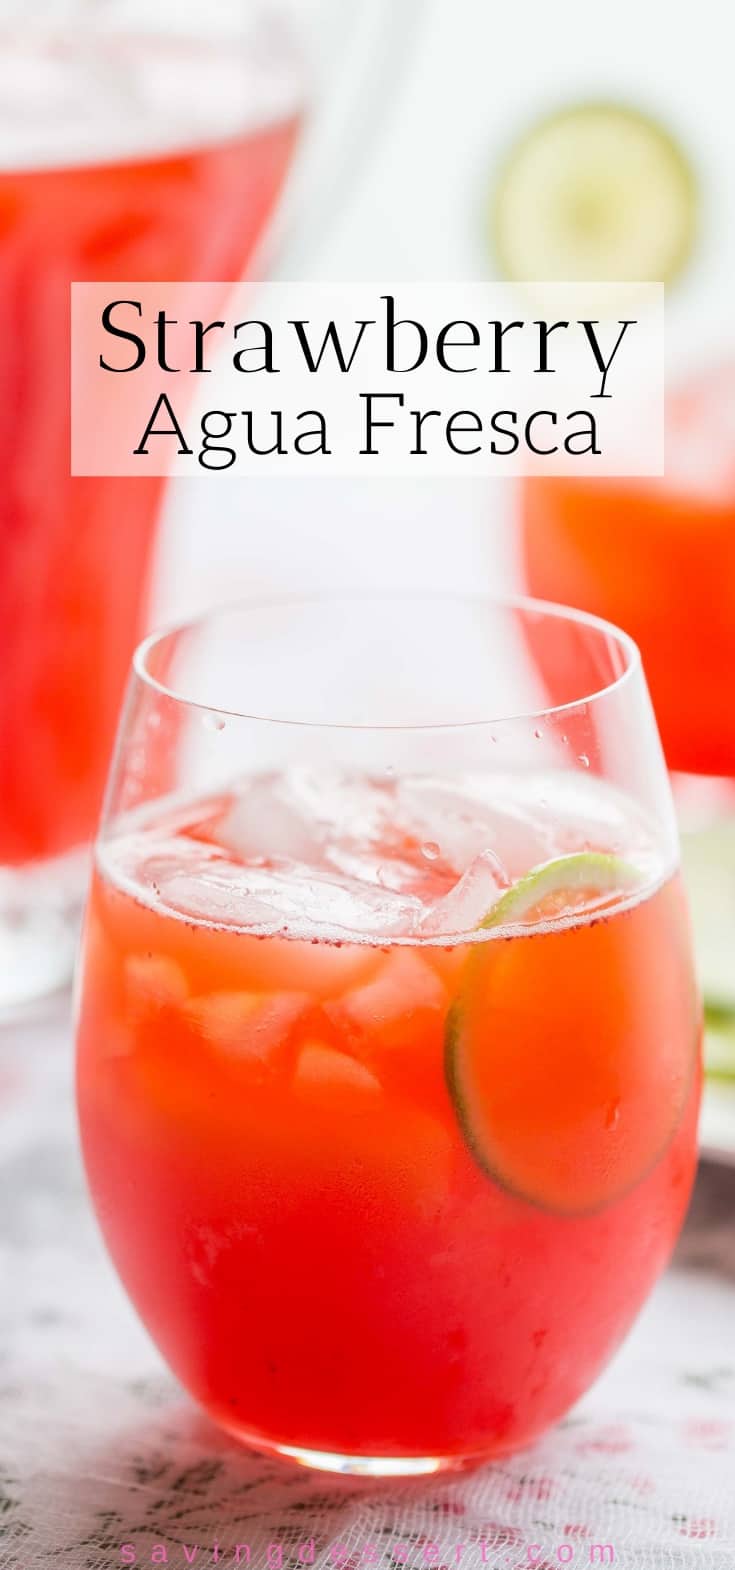 A glass of Strawberry Agua Fresca with ice and lime